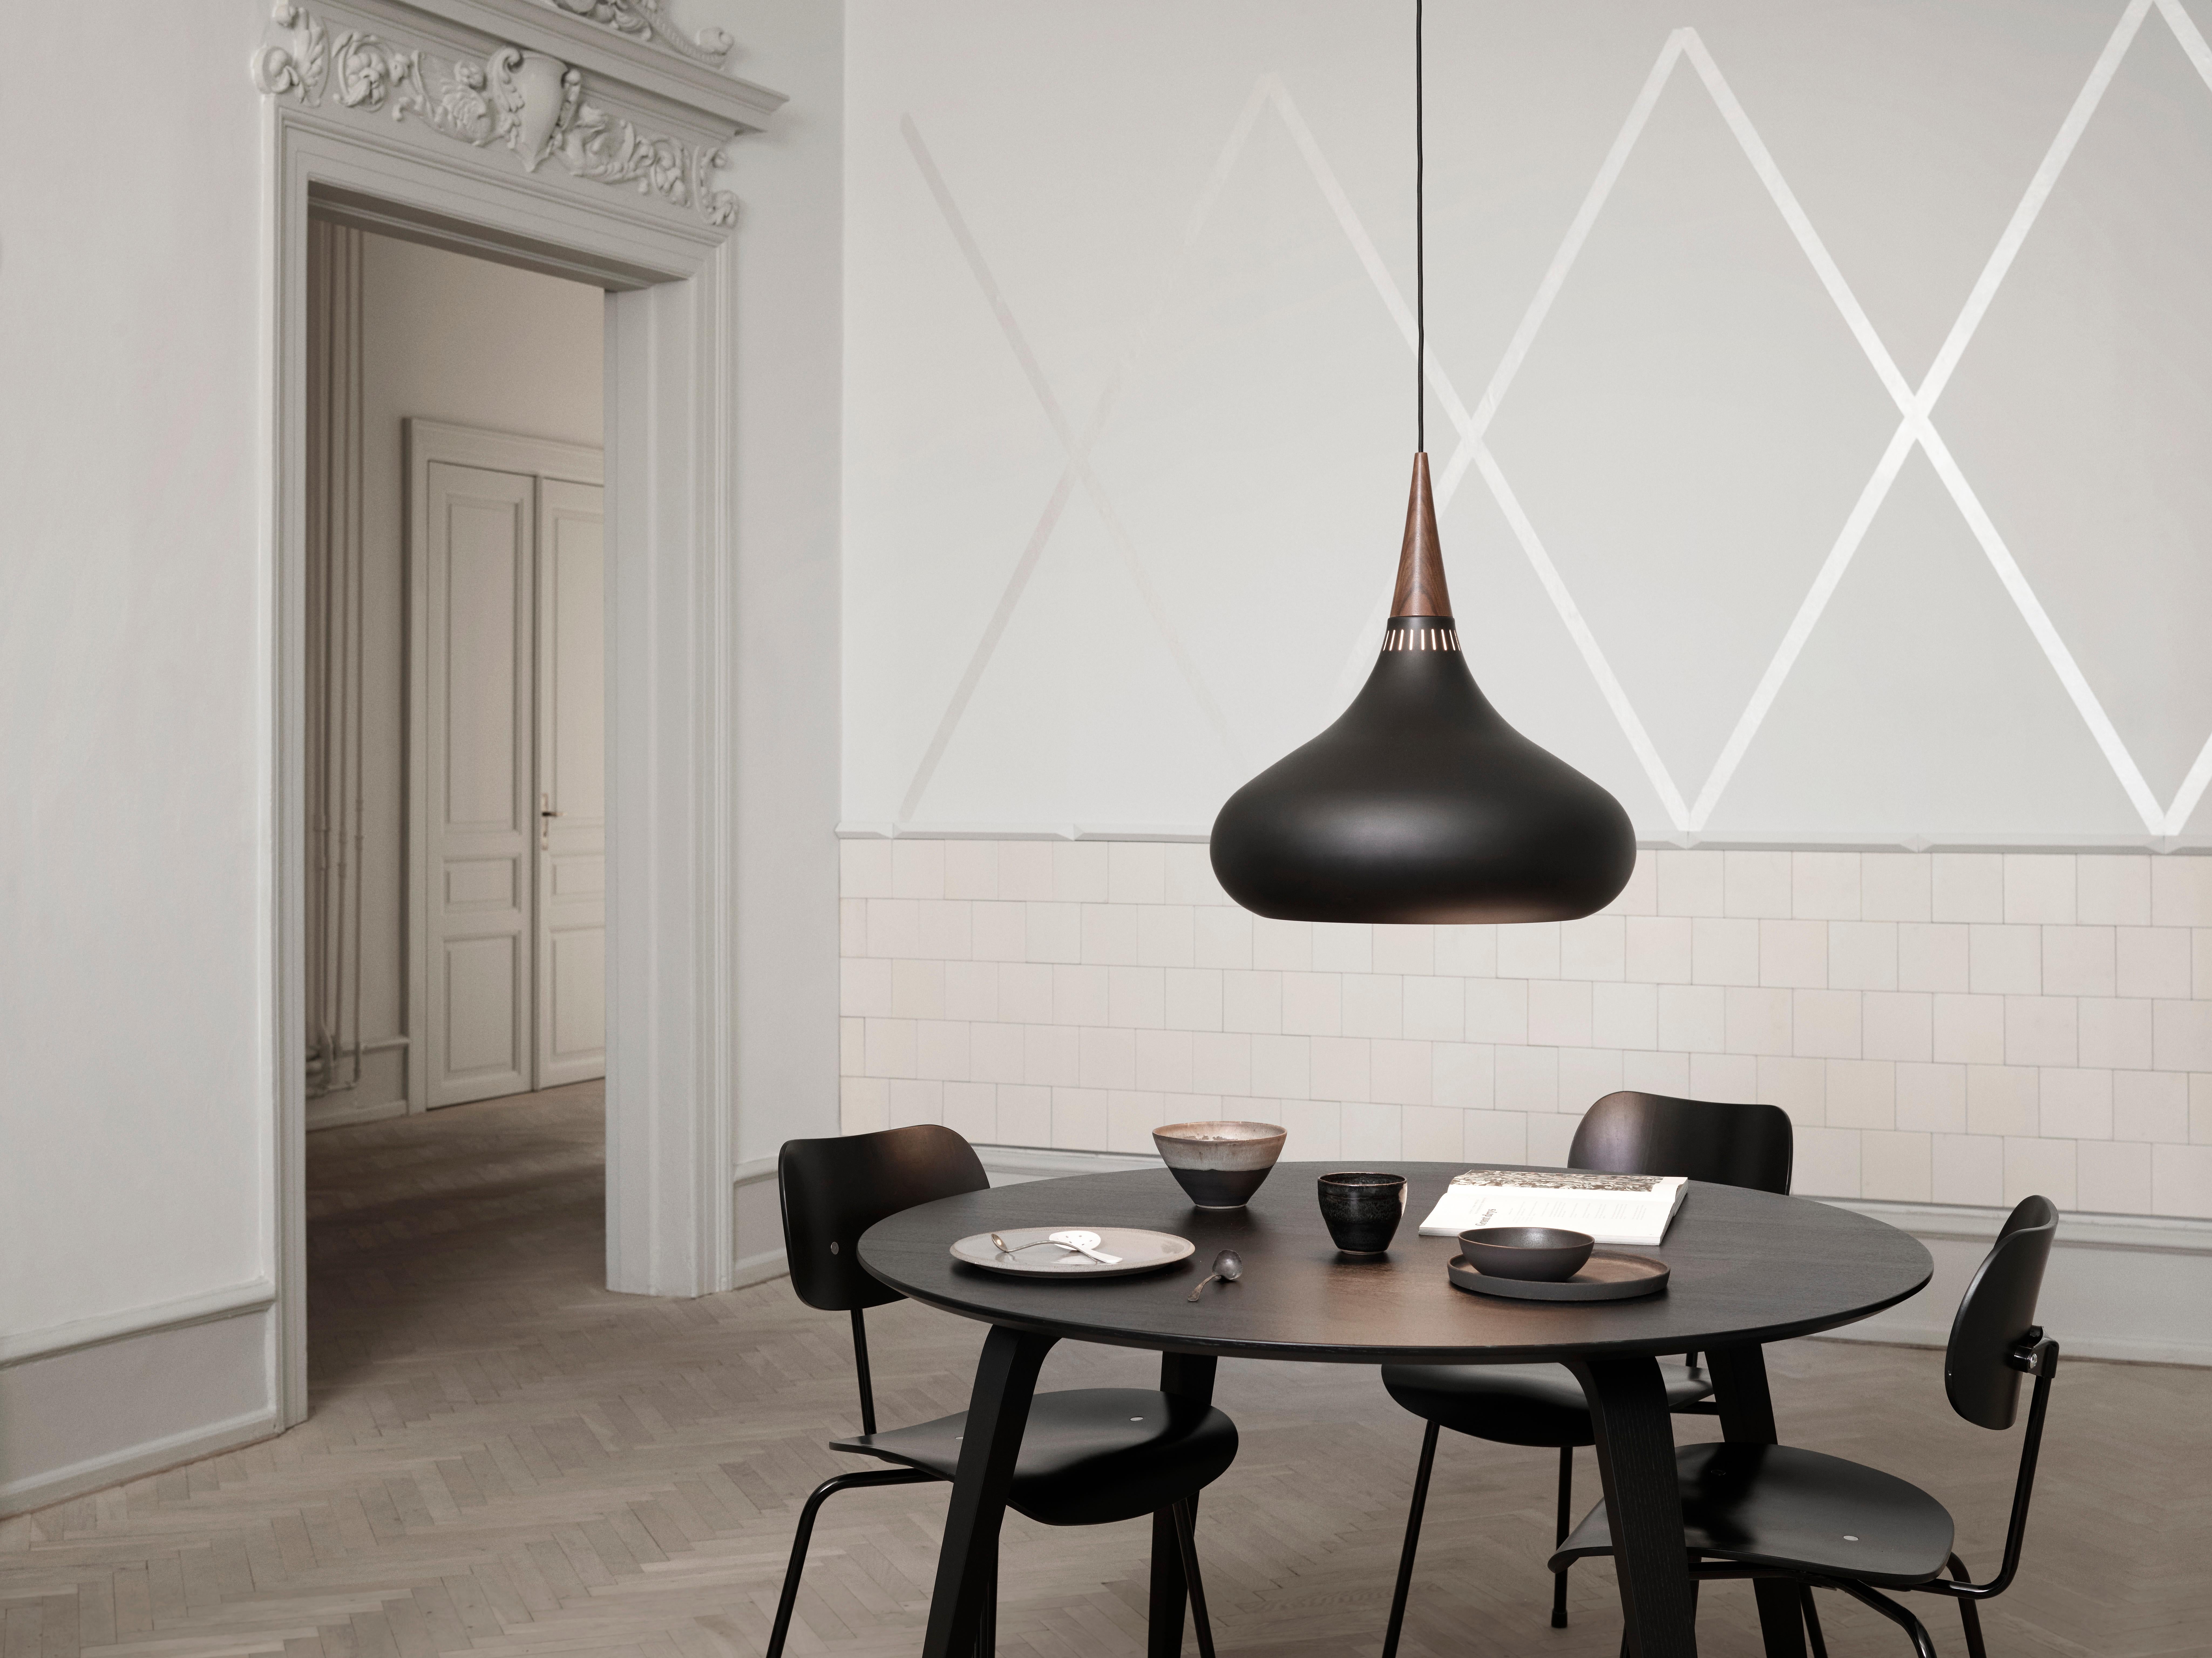 Large Jo Hammerborg 'Orient' Pendant Lamp for Fritz Hansen in Black and Rosewood.

Established in 1872, Fritz Hansen has become synonymous with legendary Danish design. Combining timeless craftsmanship with an emphasis on sustainability, the brand’s